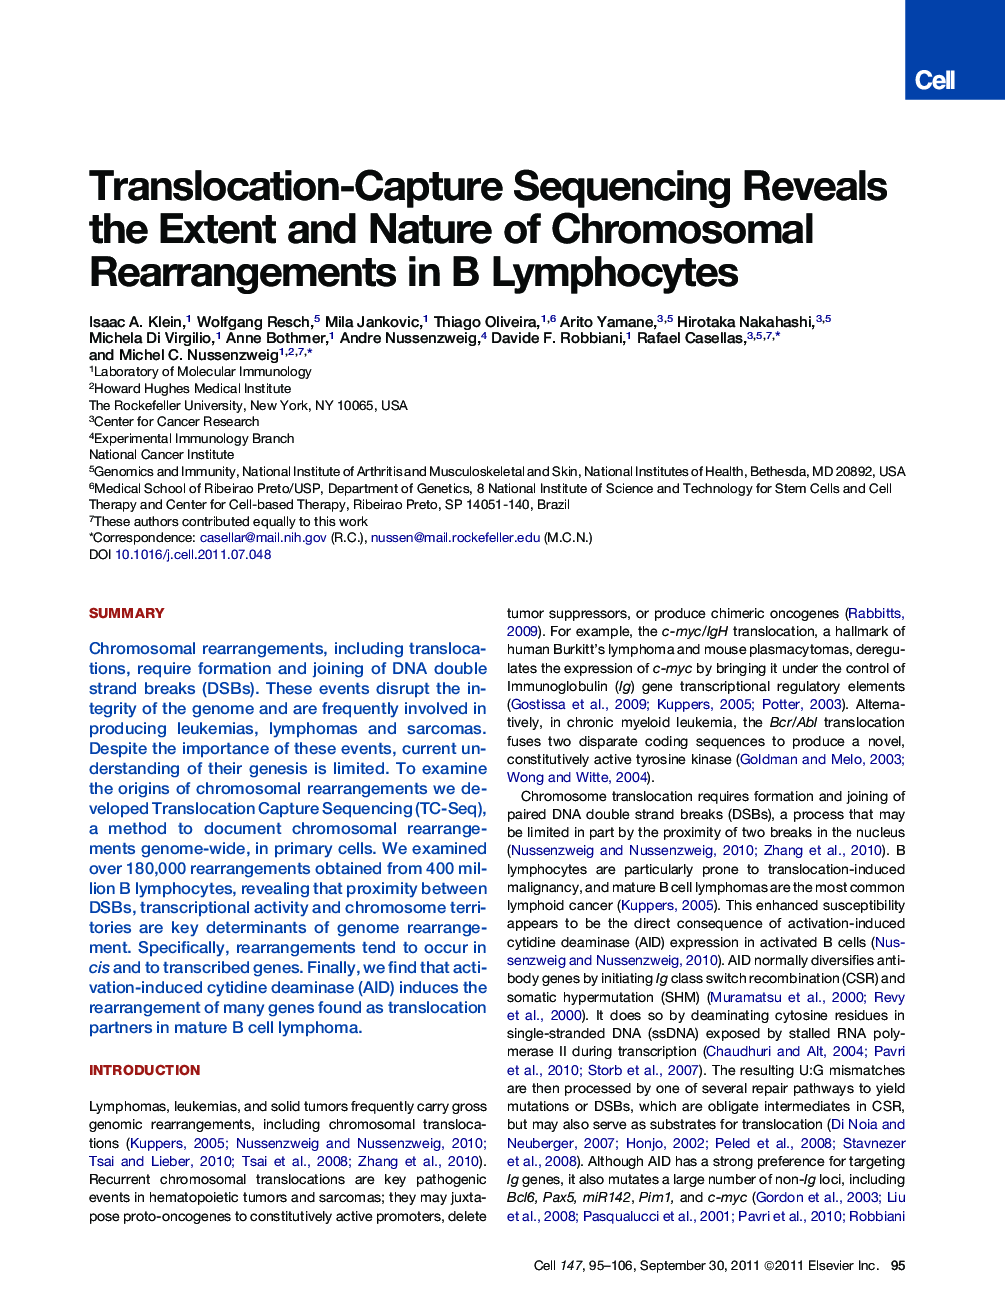 Translocation-Capture Sequencing Reveals the Extent and Nature of Chromosomal Rearrangements in B Lymphocytes